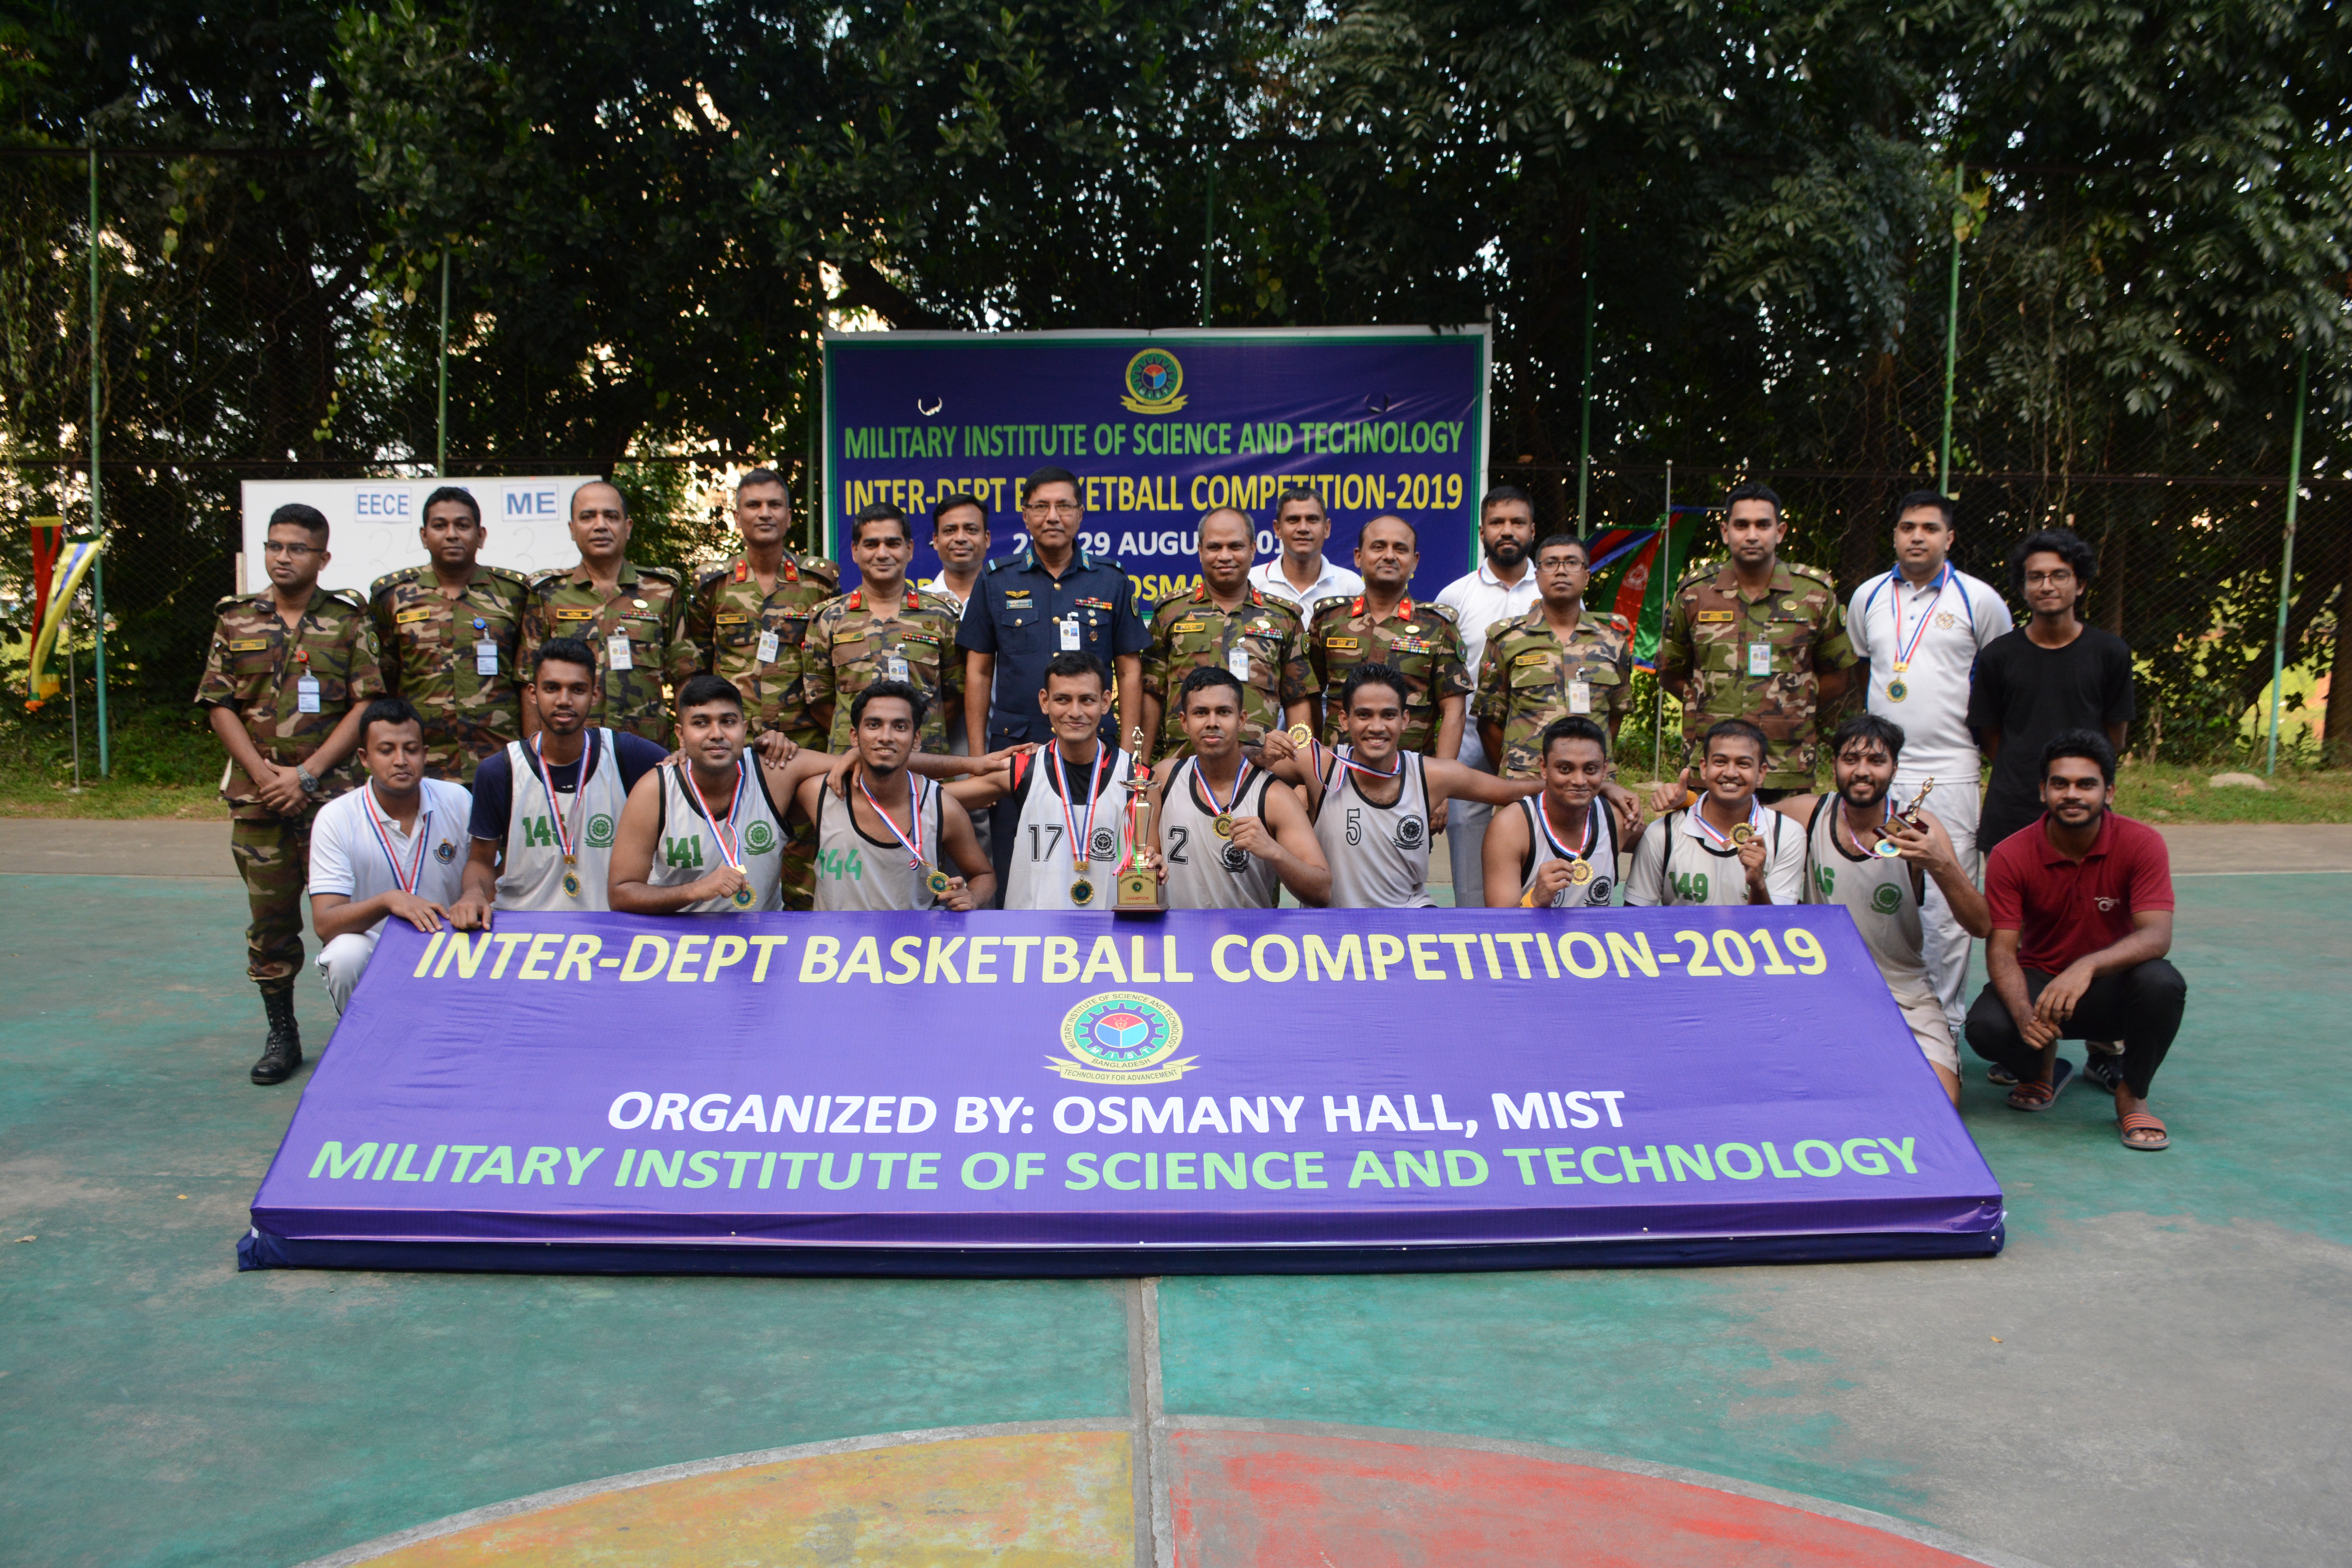 Champion in Inter Departmental Basketball Competiton 2019